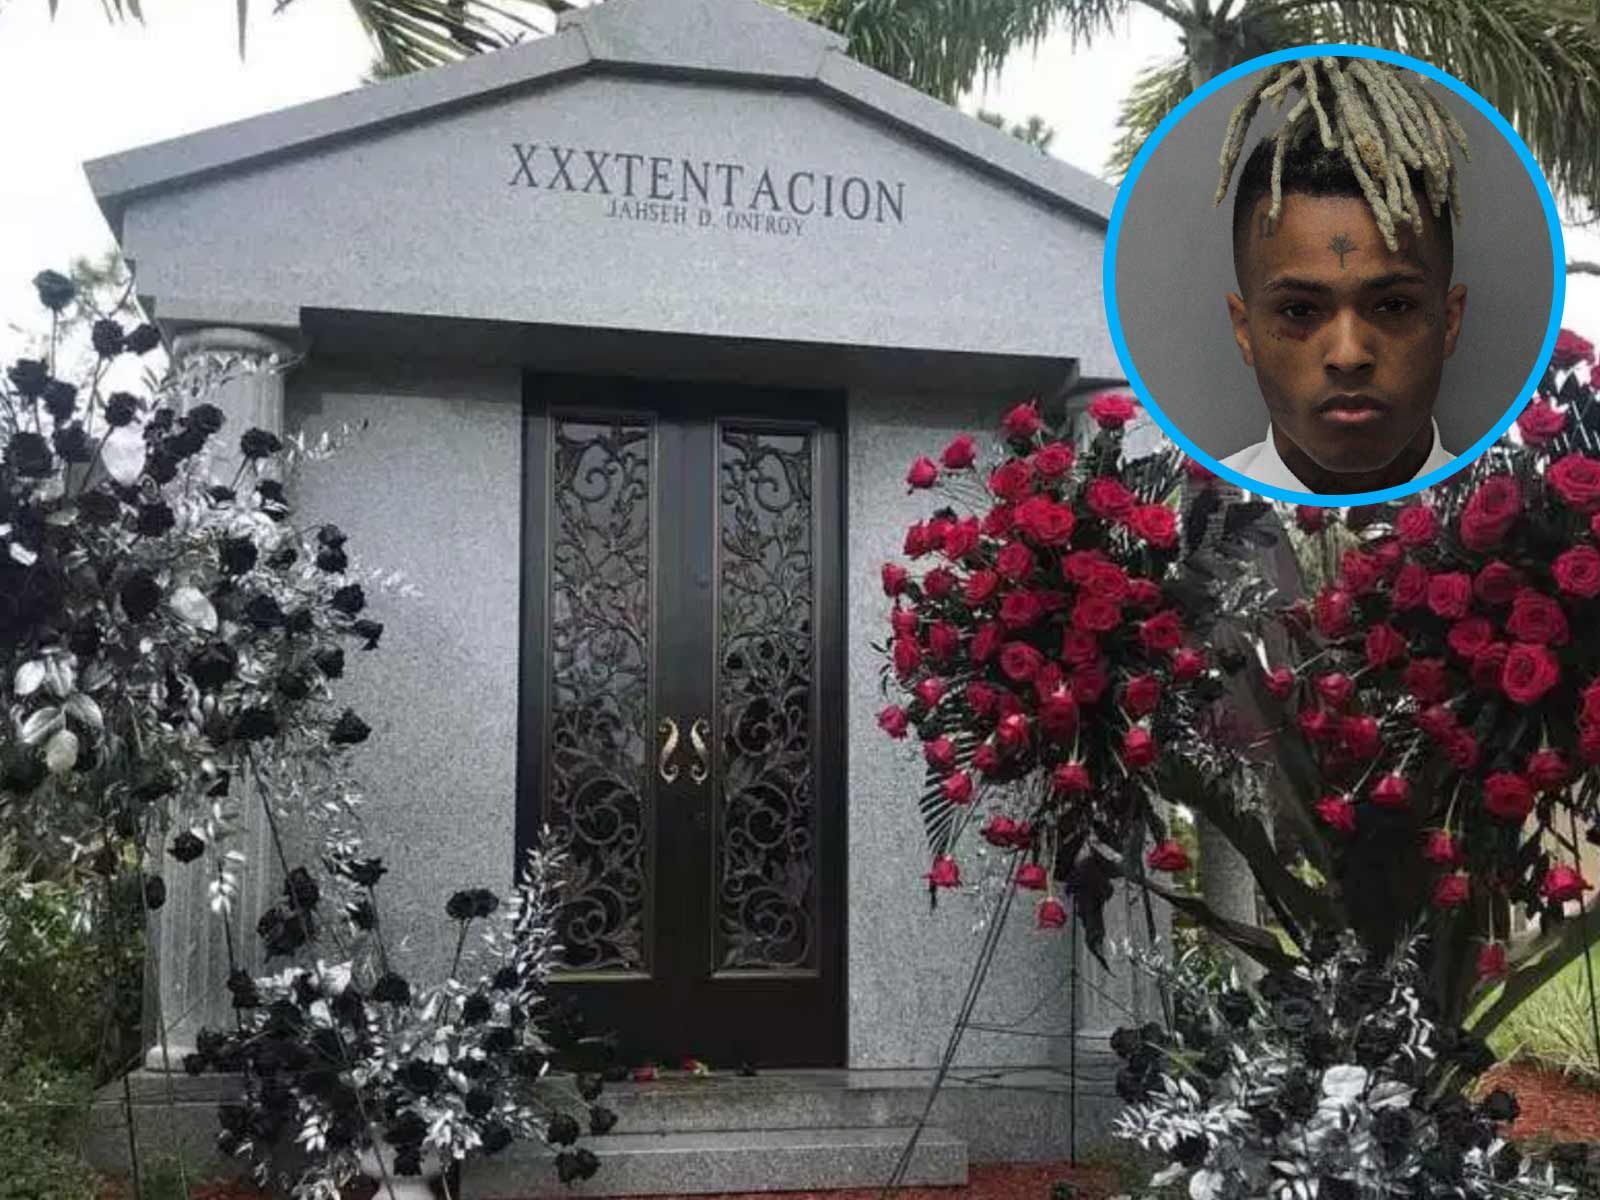 Xxxtentacion Private Funeral Featured Police Protection